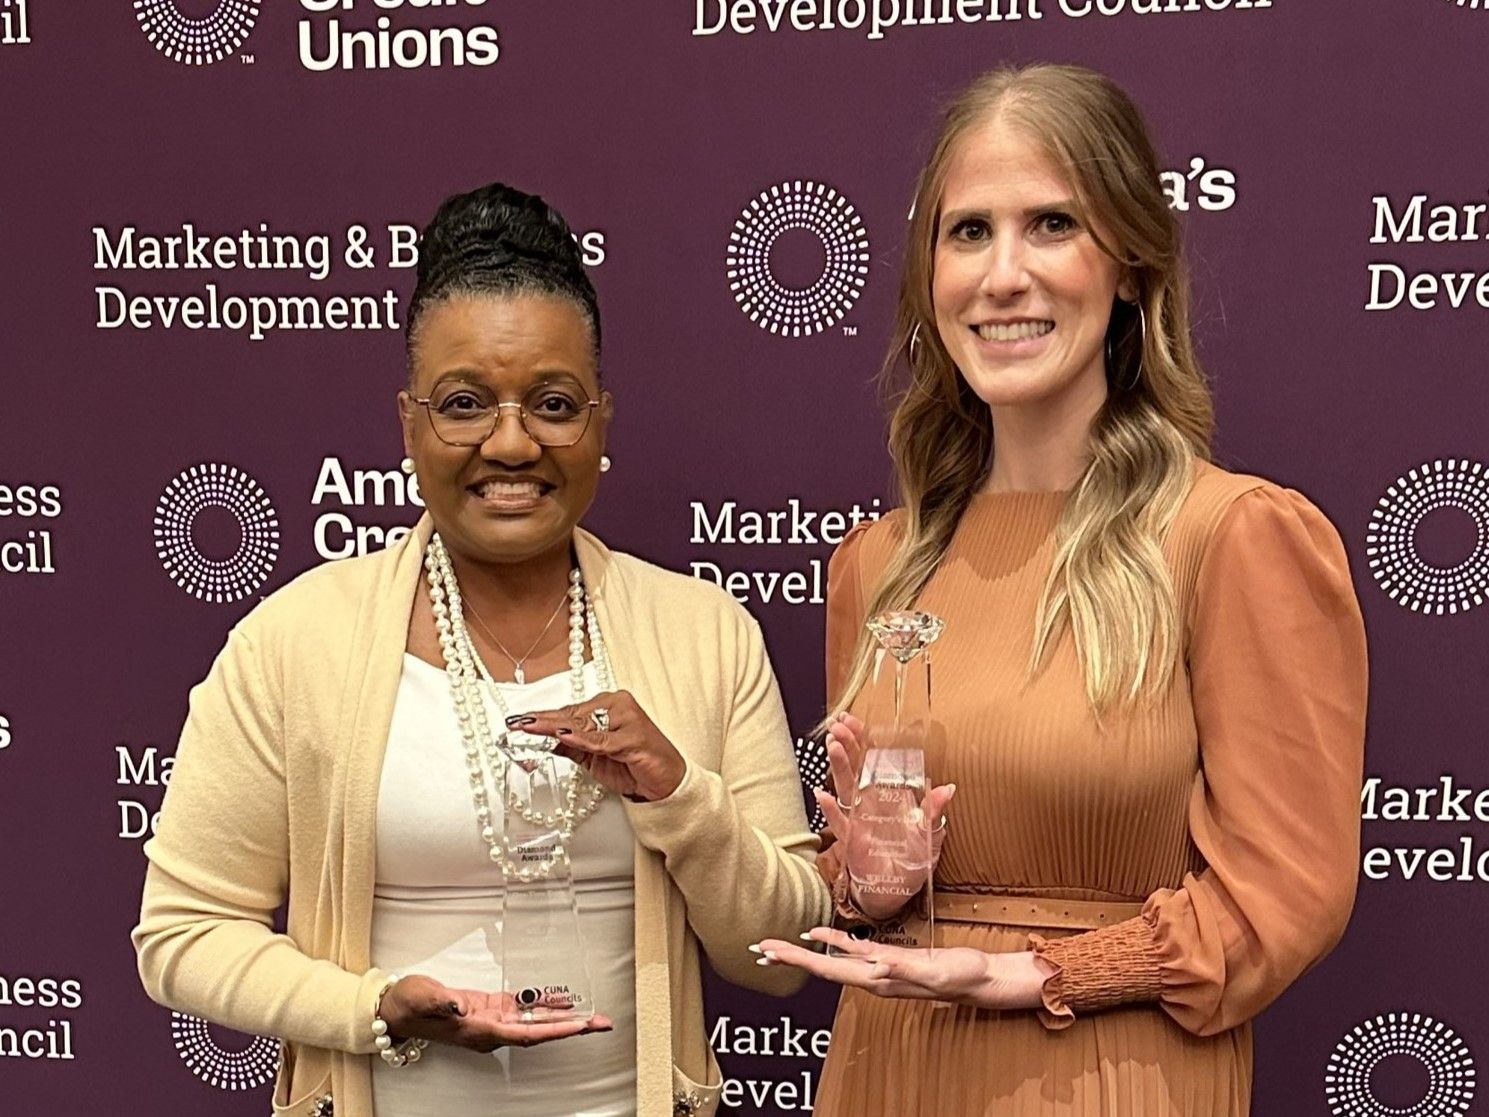 Wellby Financial leaders at the CUNA Marketing & Business Development Council’s Diamond Awards Ceremony (show from left to right): Renee Falls, Chairperson of the Supervisory Committee; and Jennifer Carson, Vice President of Marketing & Communications.